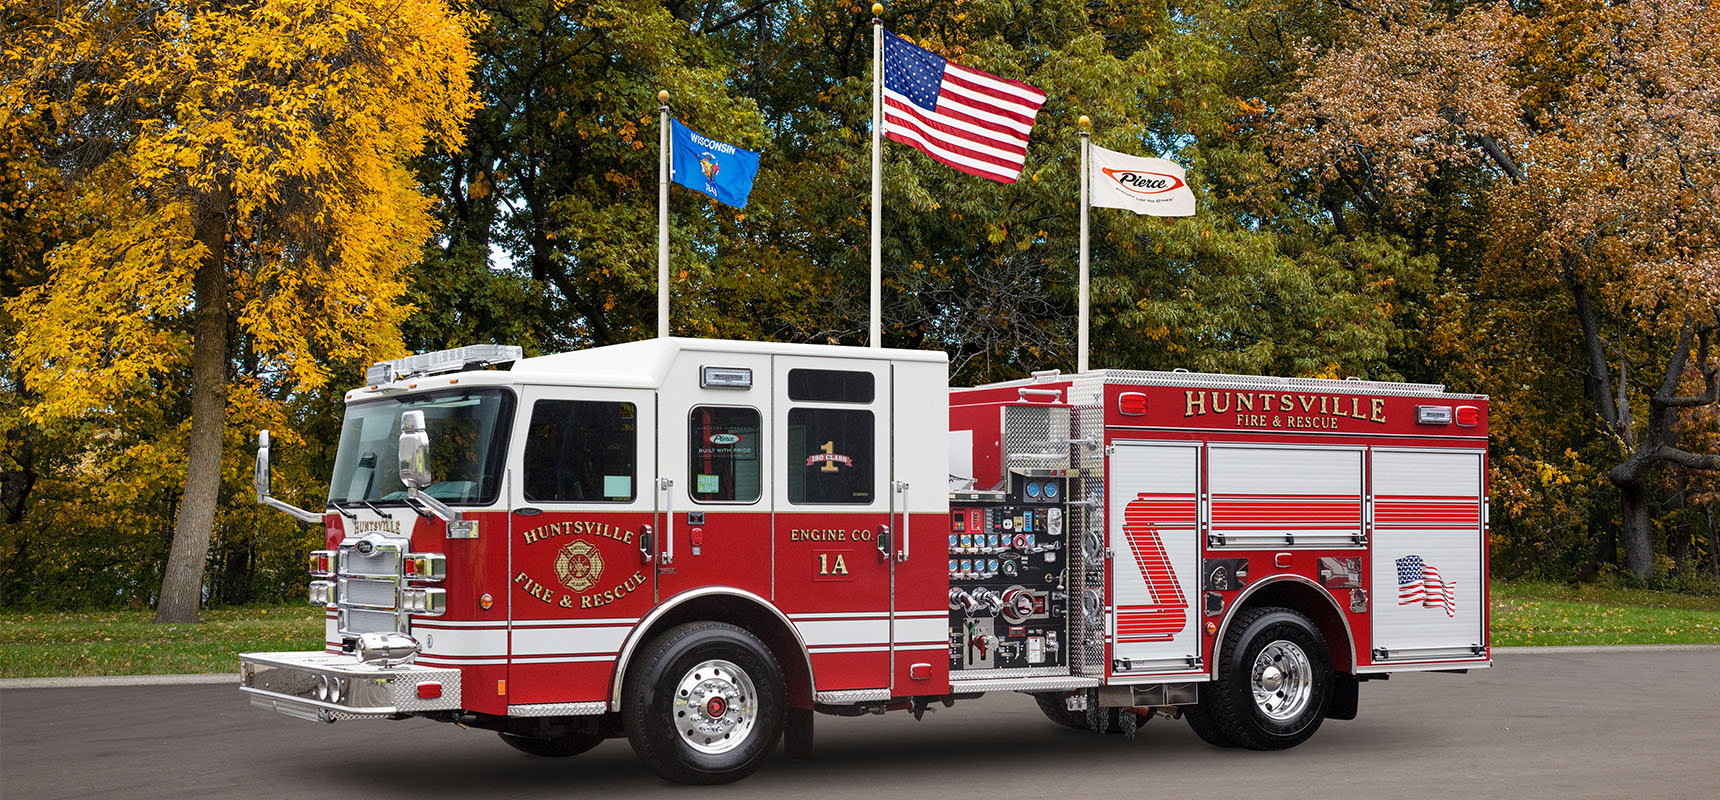 Huntsville Fire & Rescue placed an order for 21 Pierce Fire Apparatus